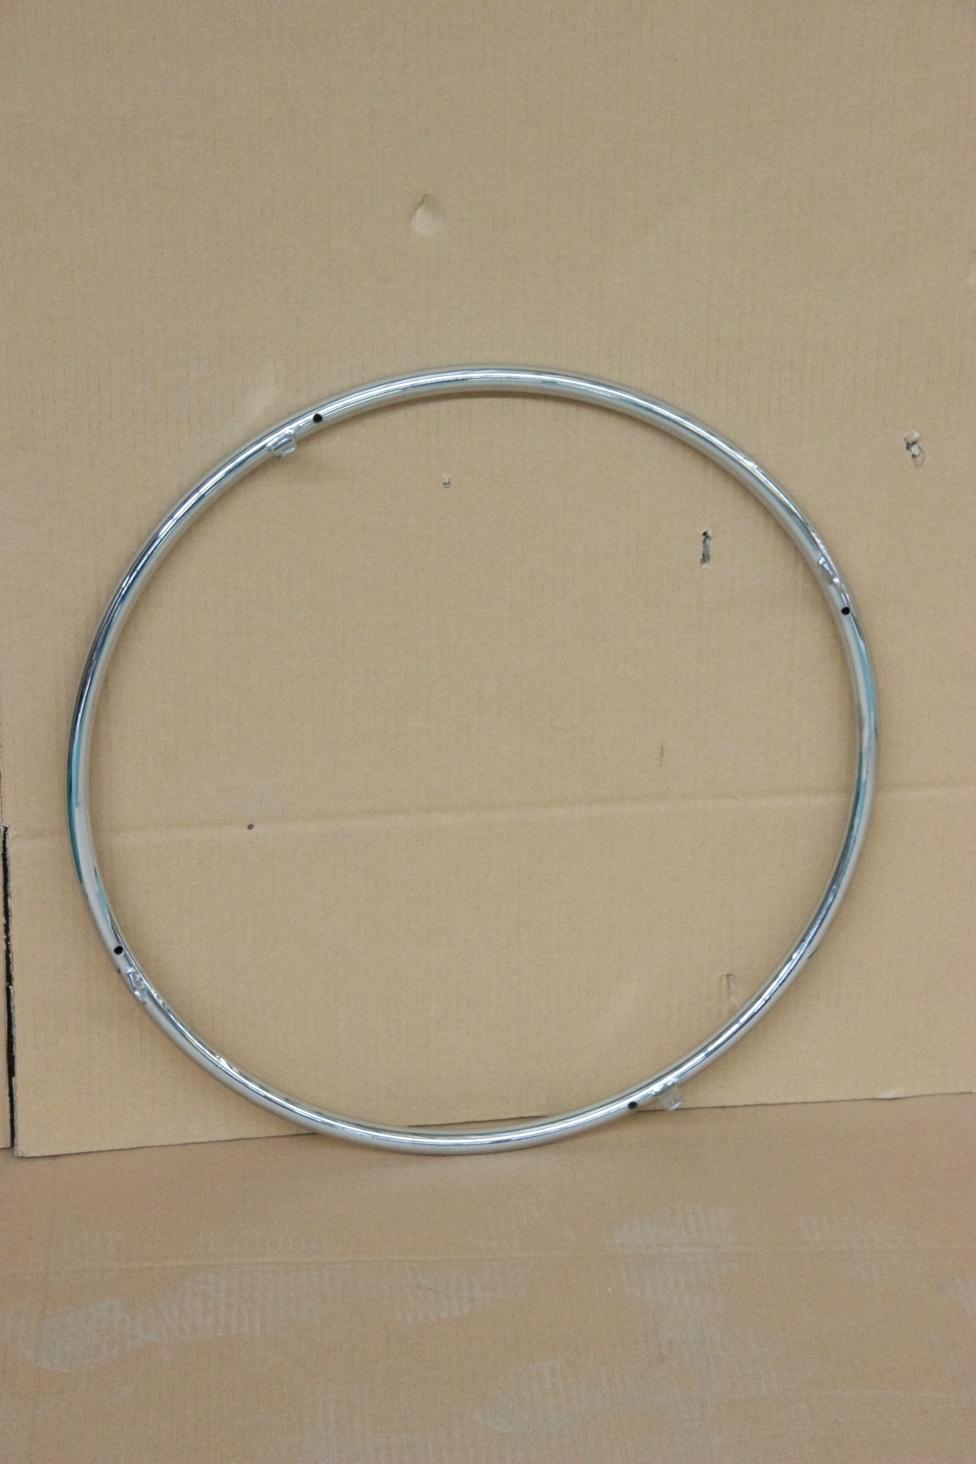 Spoke Wheel with Hand Rim for Manual Wheelchairs.